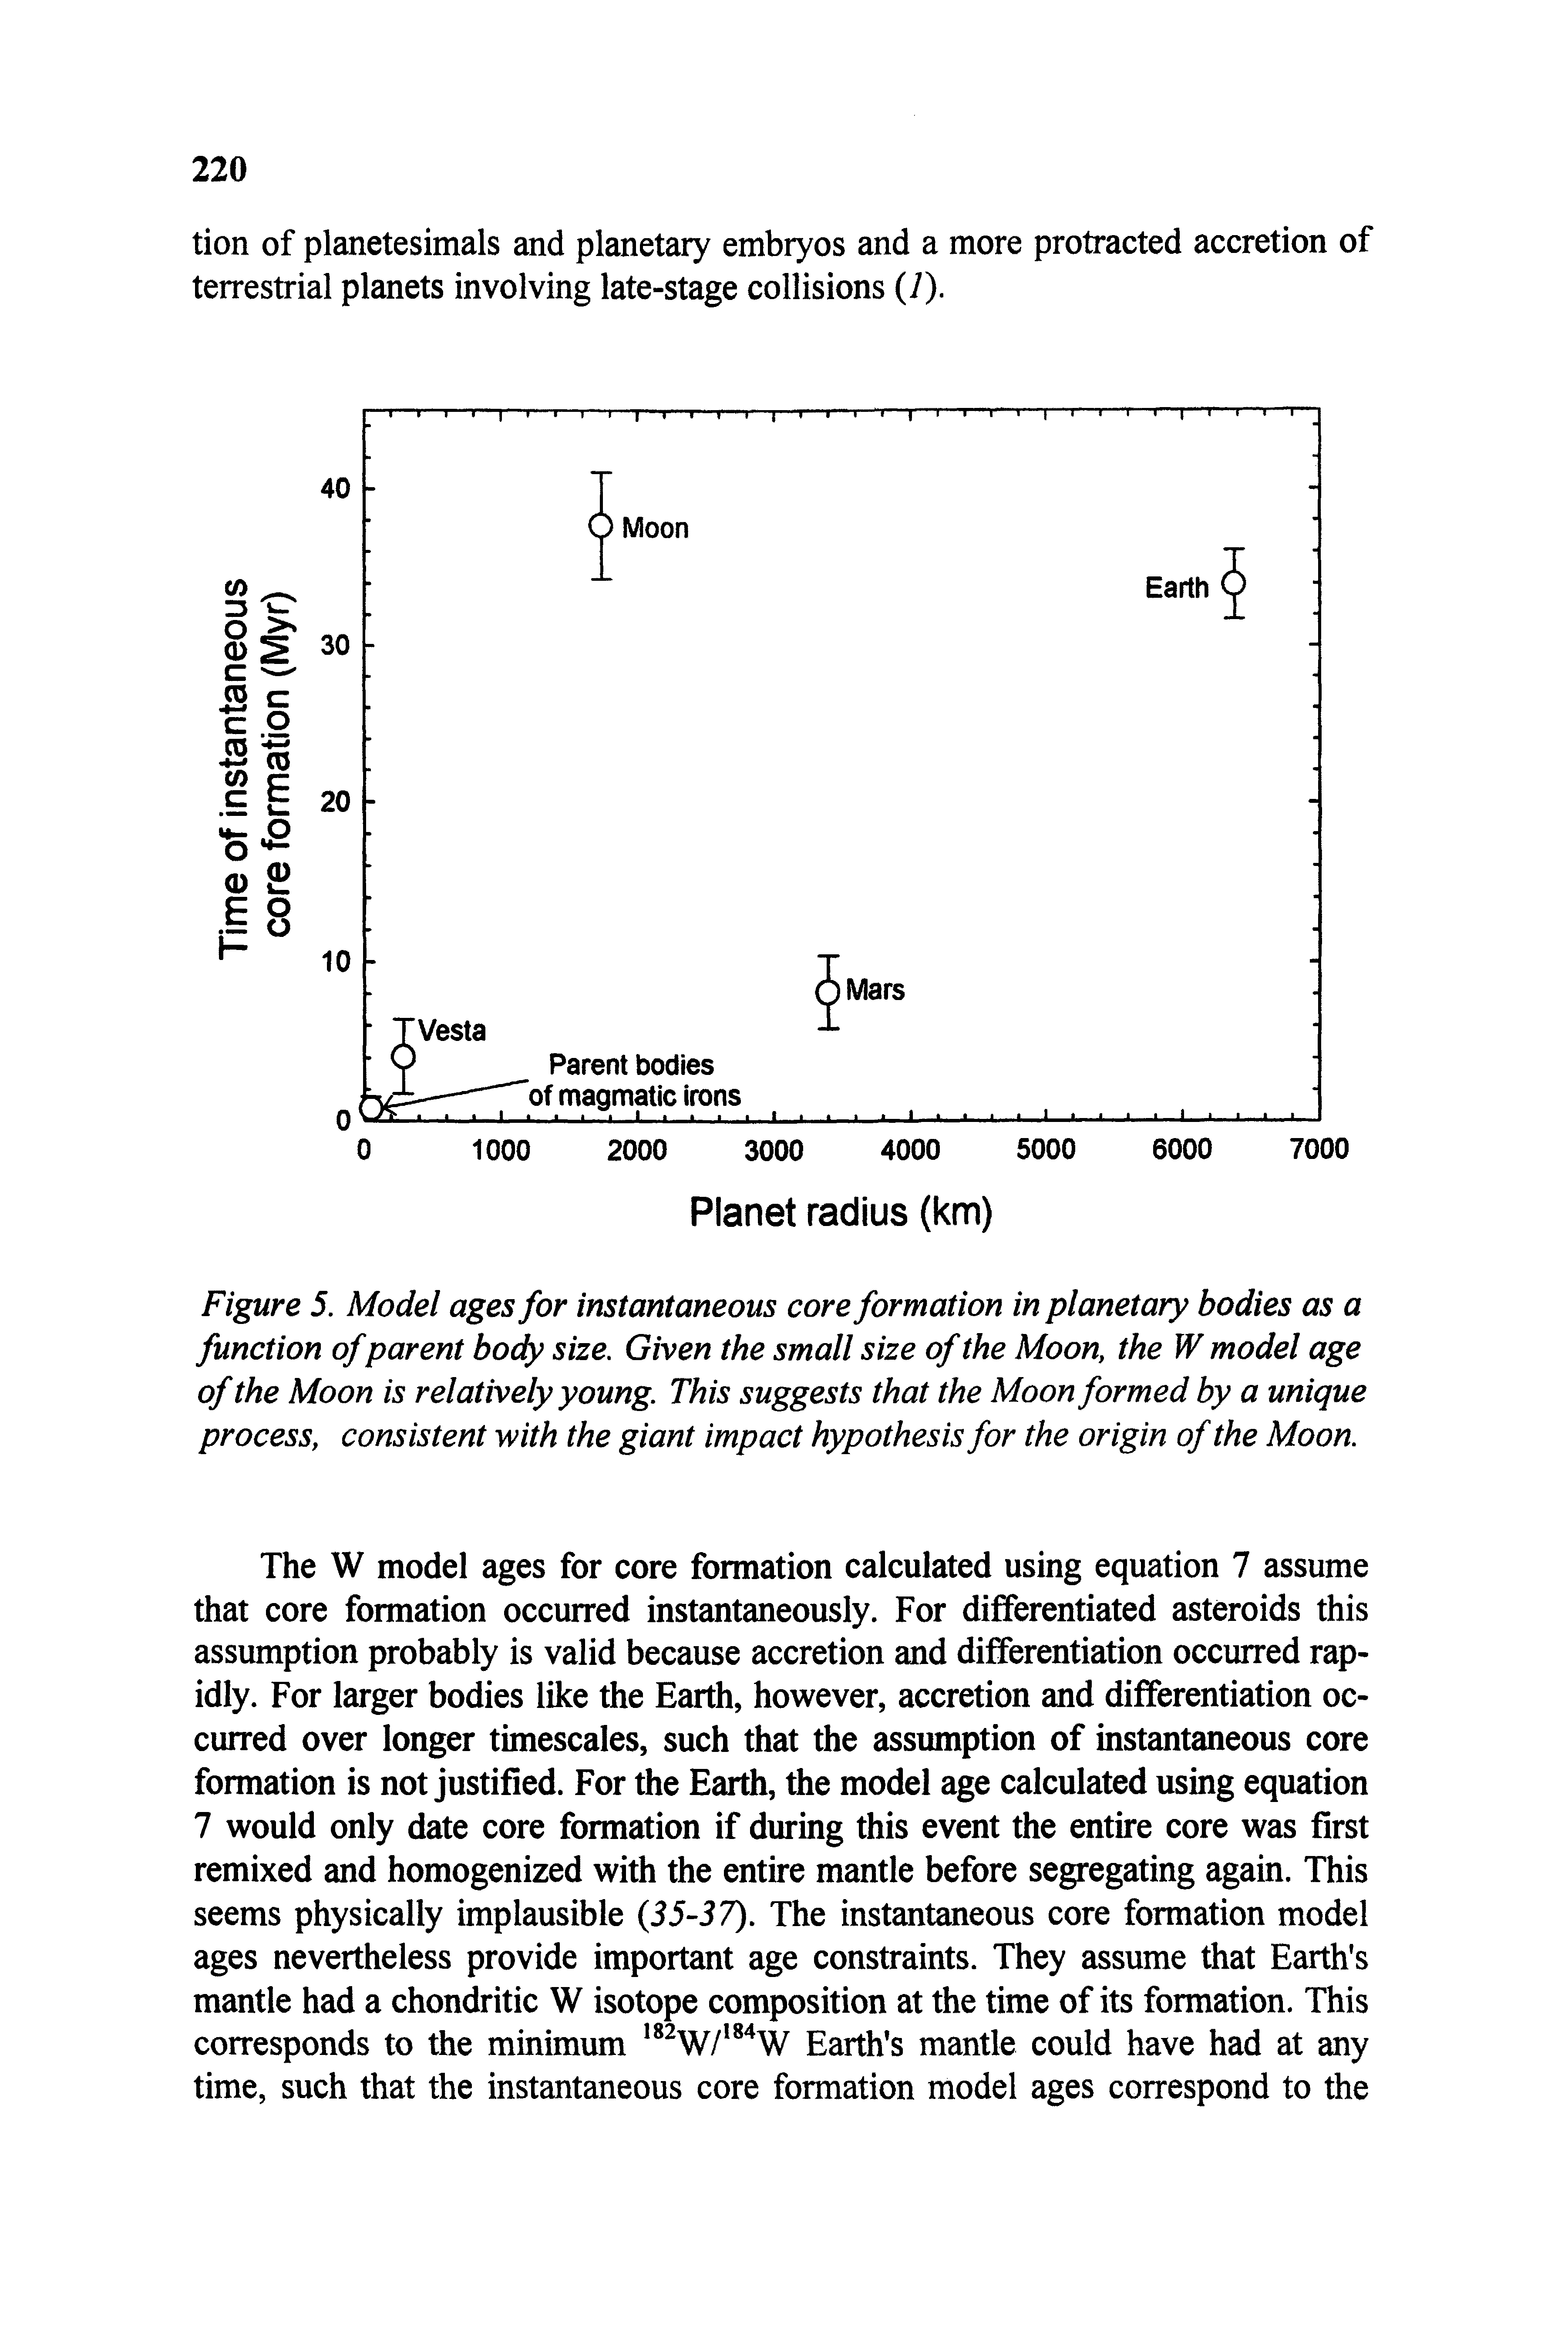 Figure 5. Model ages for instantaneous core formation in planetary bodies as a function ofparent body size. Given the small size of the Moon, the W model age of the Moon is relatively young. This suggests that the Moon formed by a unique process, consistent with the giant impact hypothesis for the origin of the Moon.